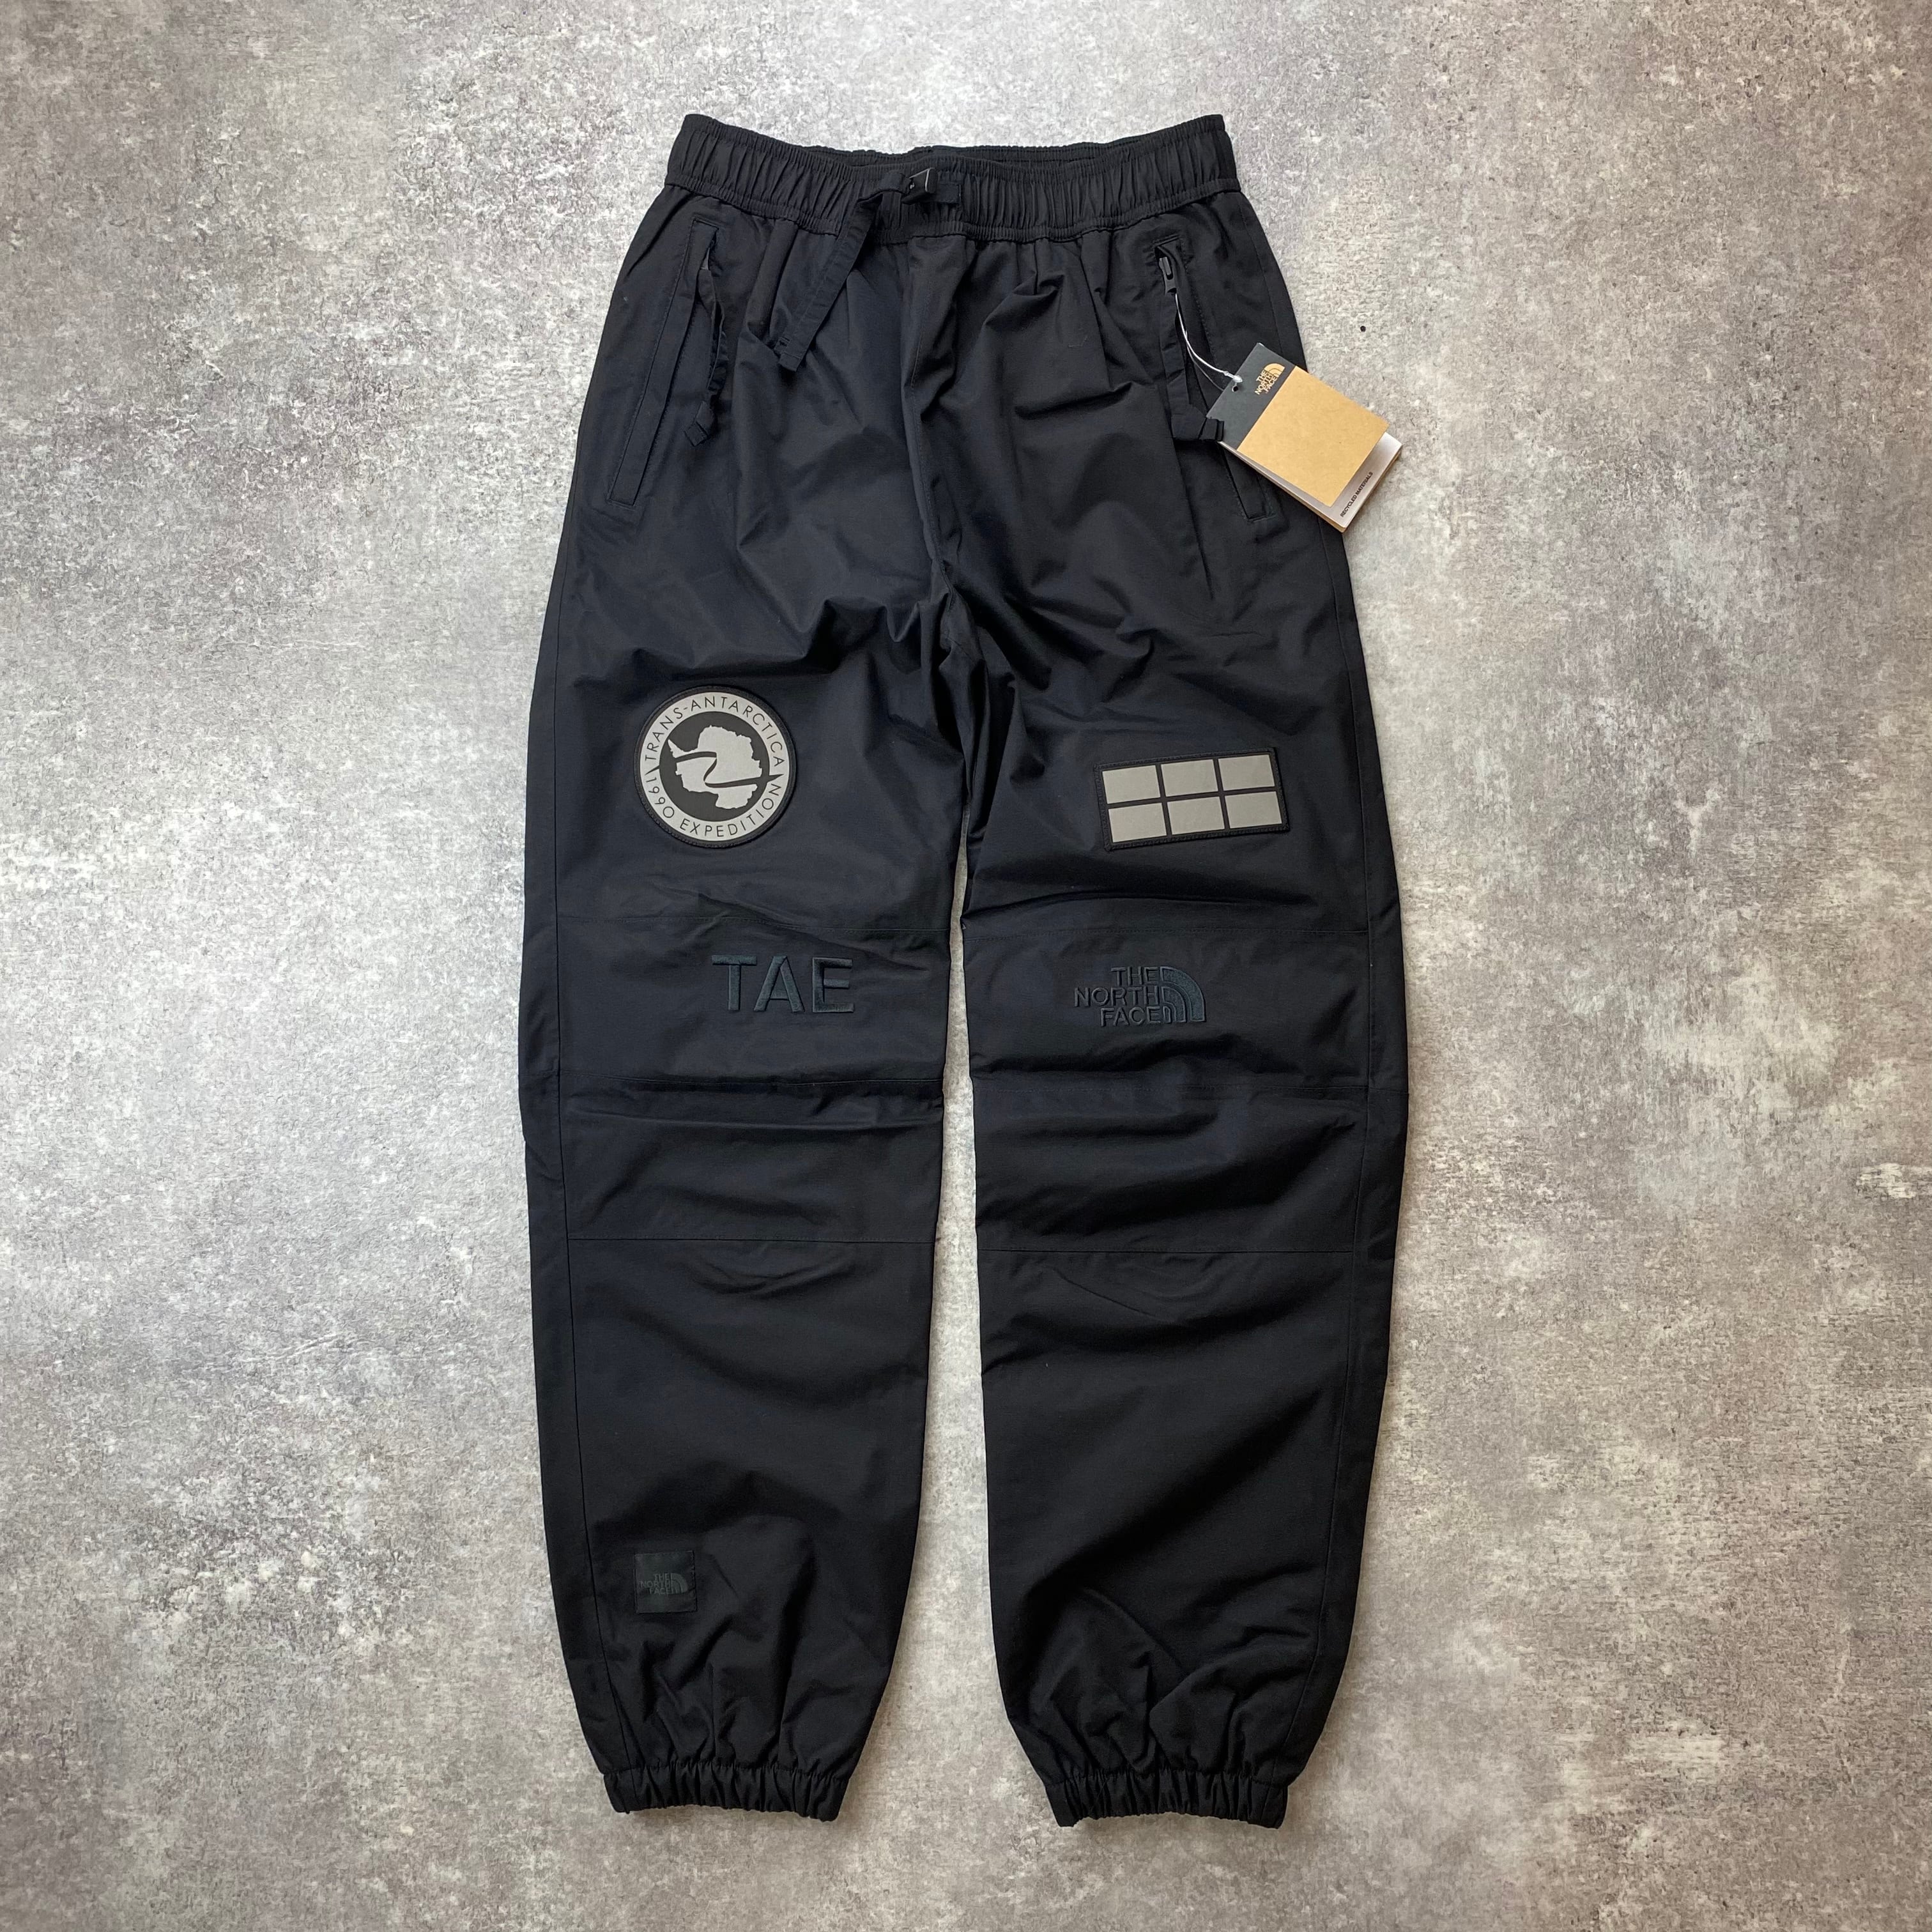 THE NORTH FACE / Men's Trans-Antarctica Expedition Pant / TNF ...